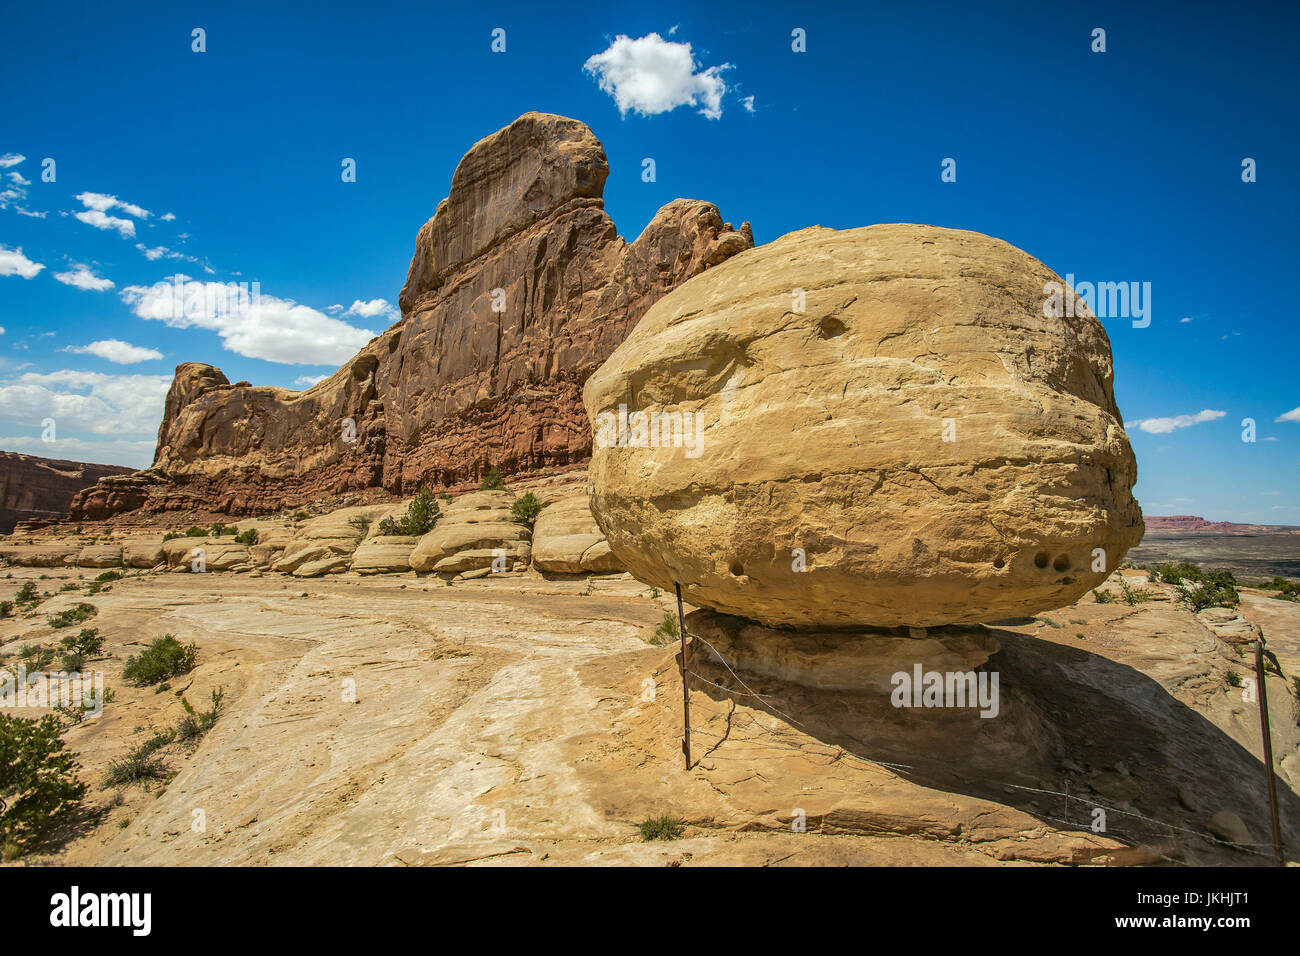 Off road vehicle views of Moab Utah trails on bright sunny days Stock Photo